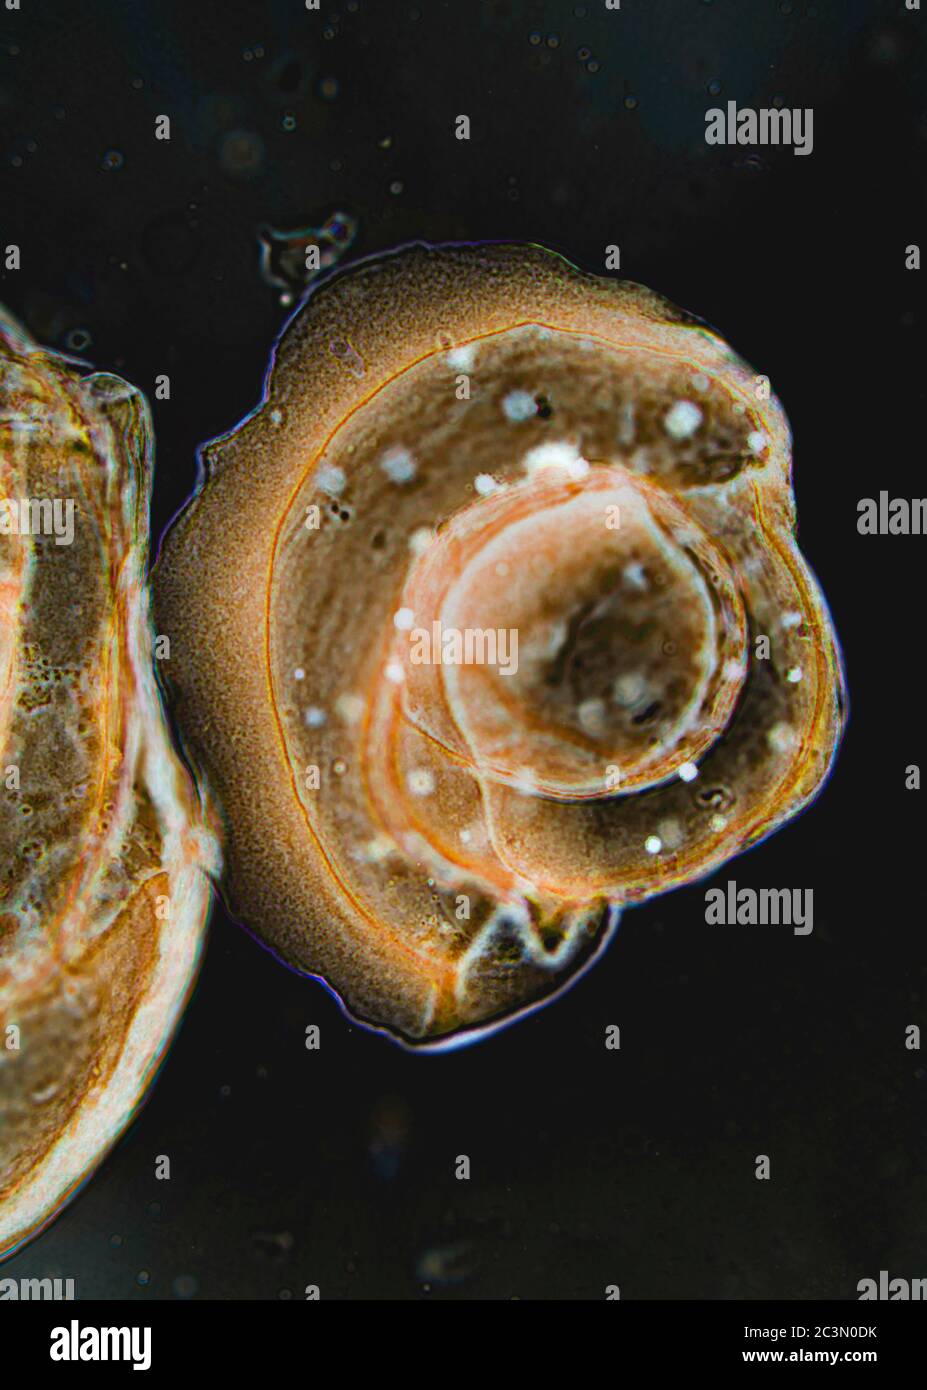 Foraminifera tests, amoeboid protists from Adriatic Sea, microscope view Stock Photo